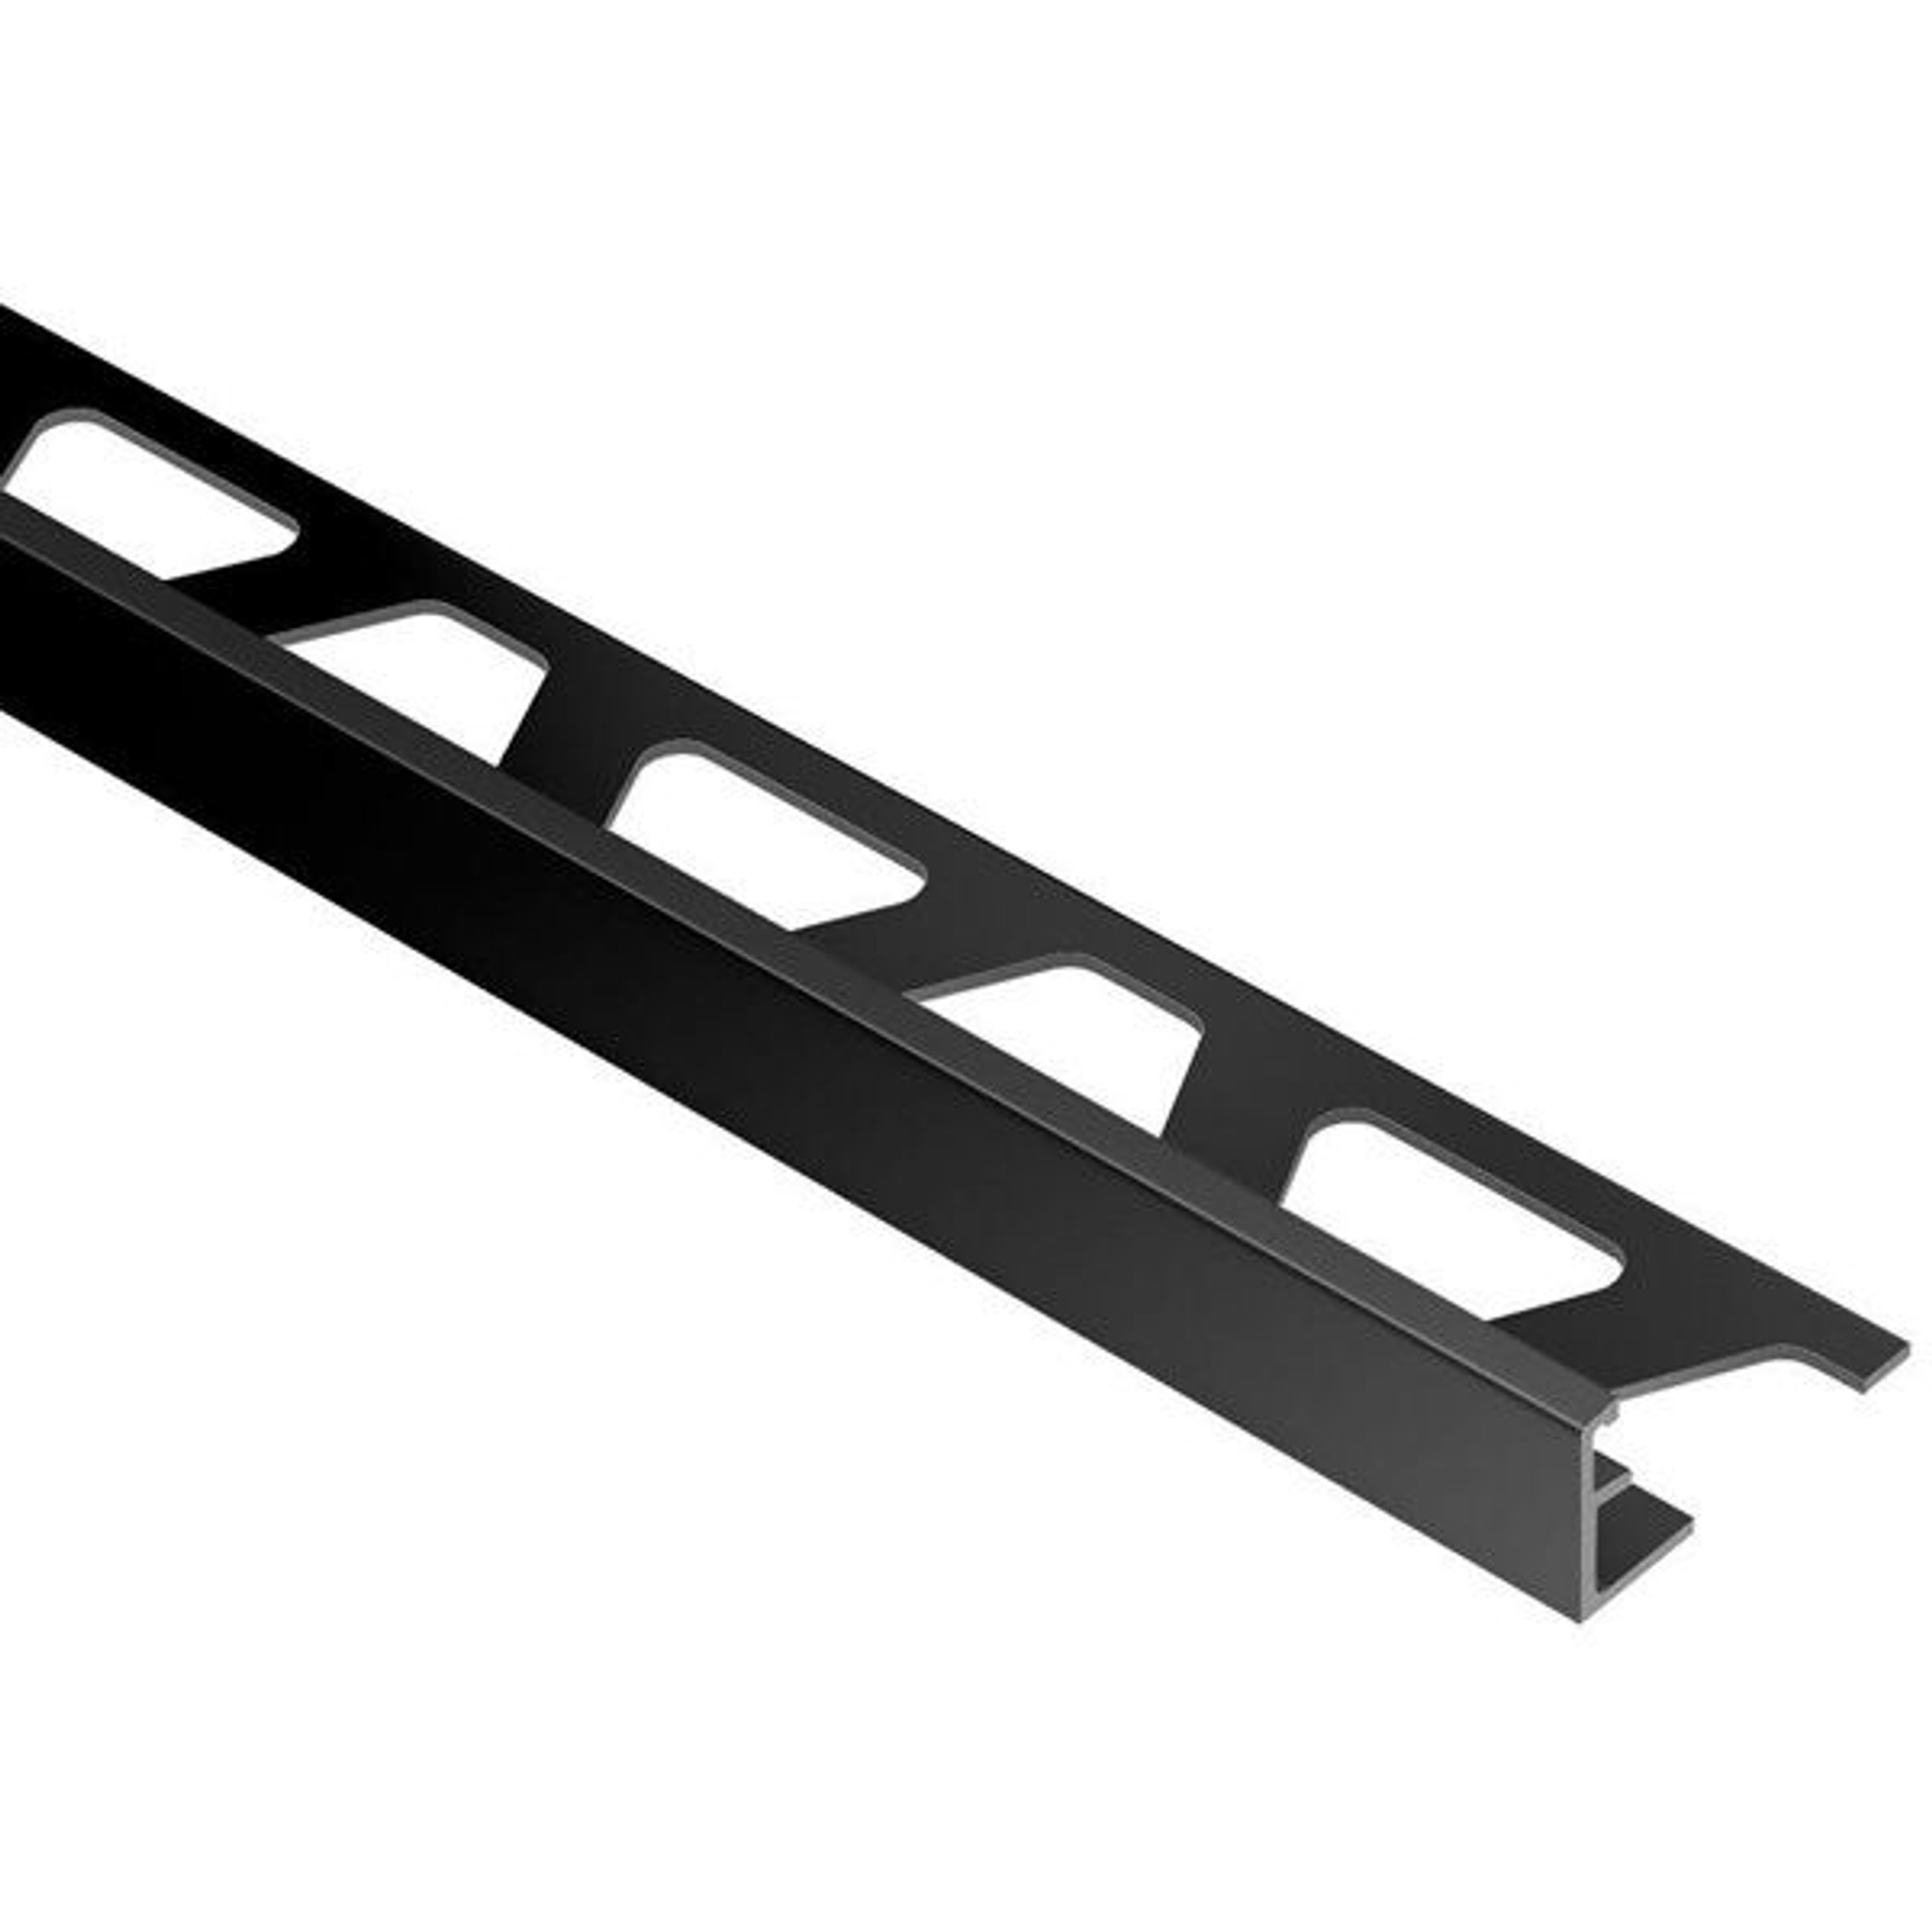 Schluter JOLLY Anodized Aluminum Tile Edging Trim - 1/2" Bright Black Anodized (AGSG)